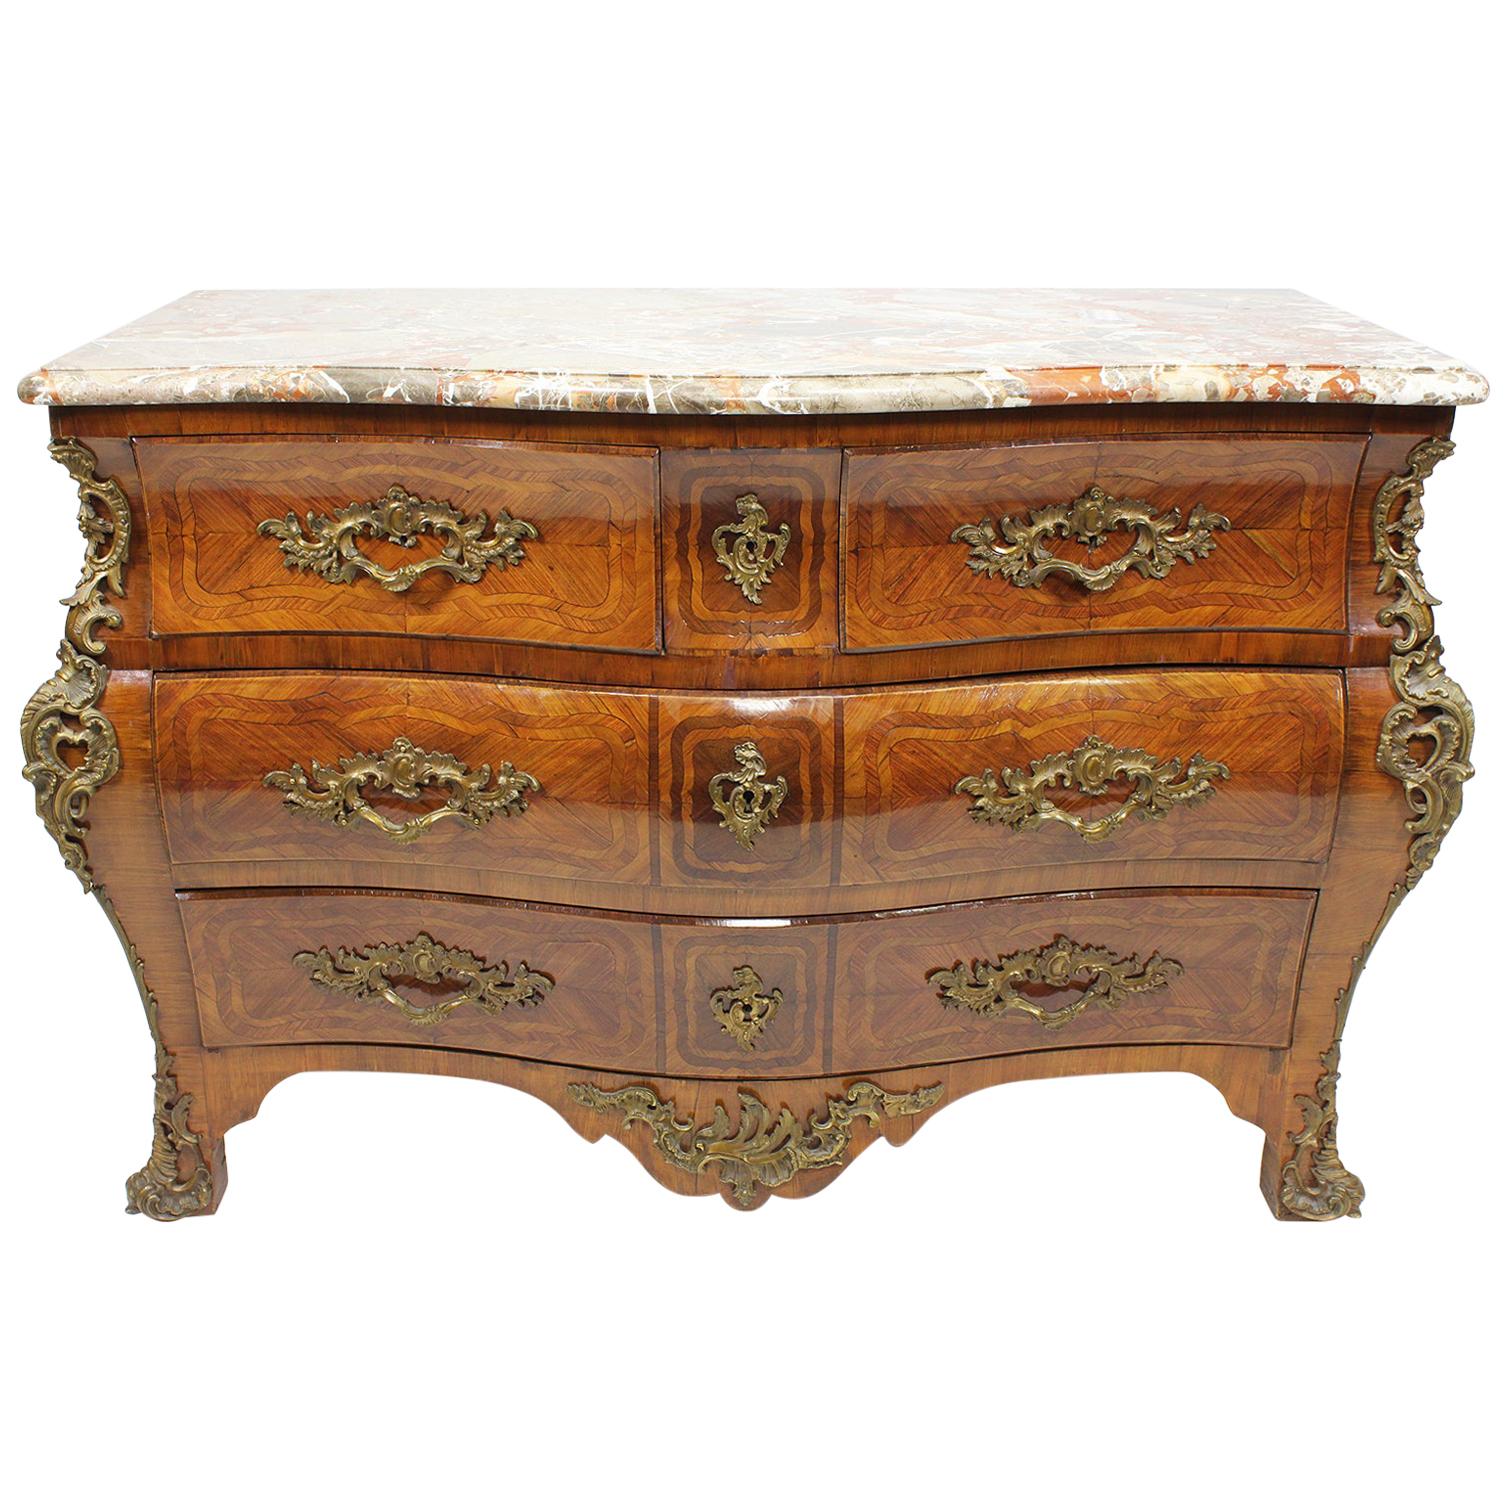 French Regency 19th/20th Century Louis XV/XVI Style Gilt-Bronze Mounted Commode For Sale